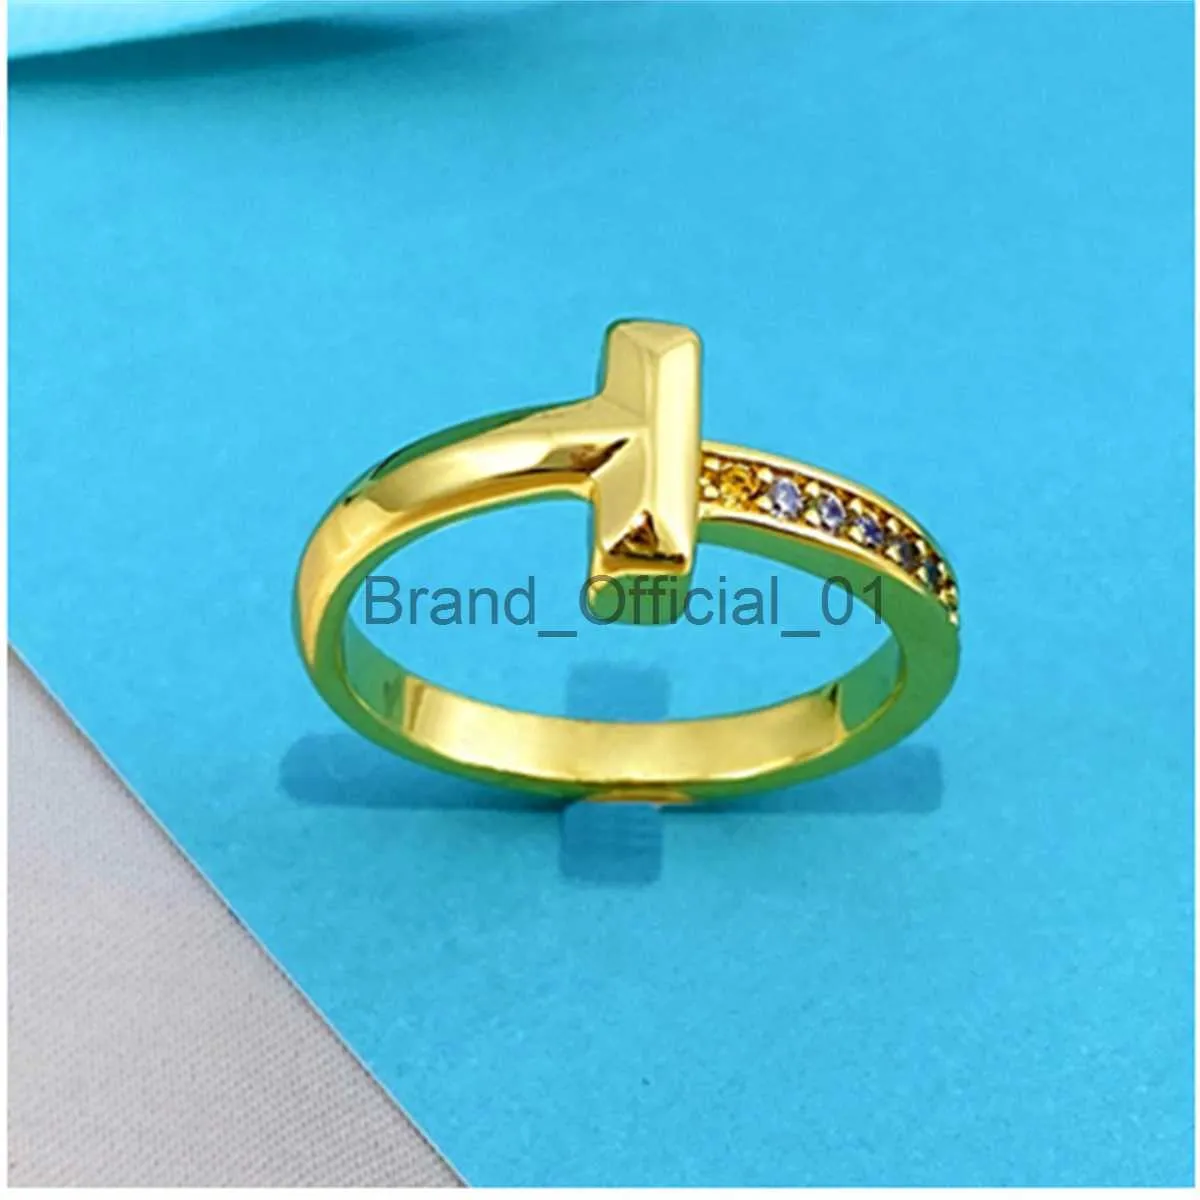 Light Weight Gold Rings | Product tags |